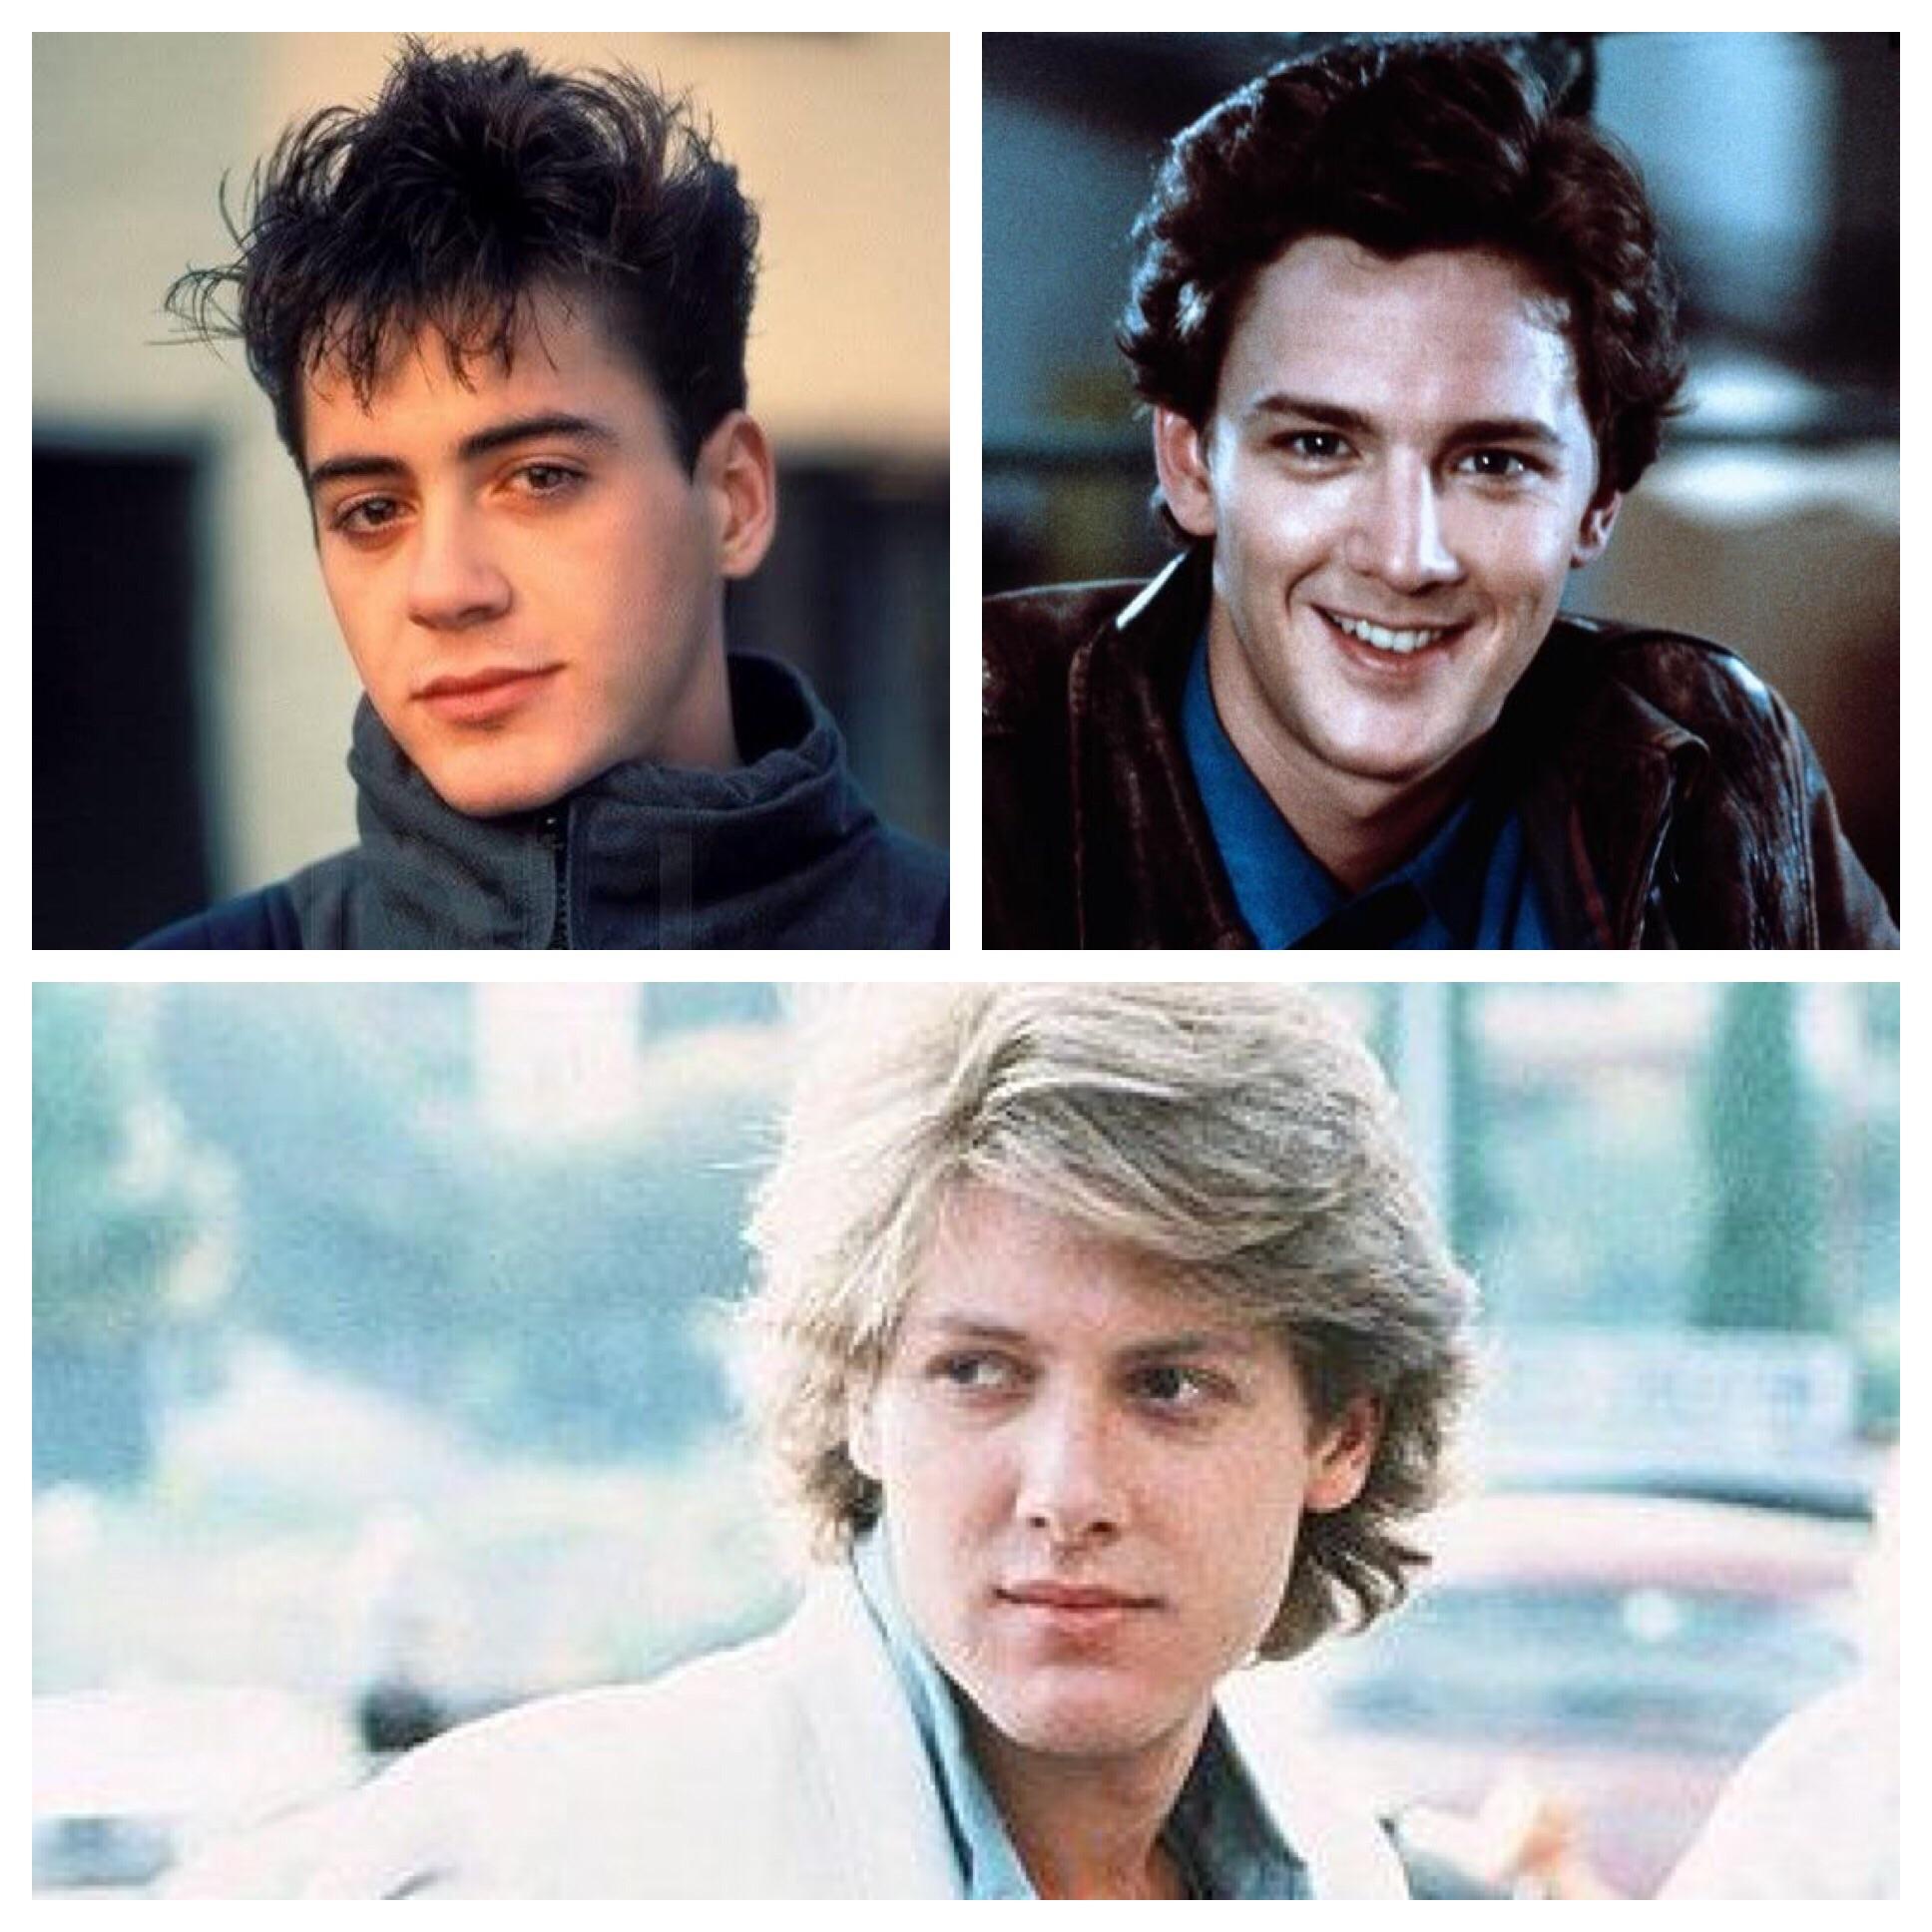 80’s movie heart throbs! Robert Downey Jr. , Andrew McCarthy and James